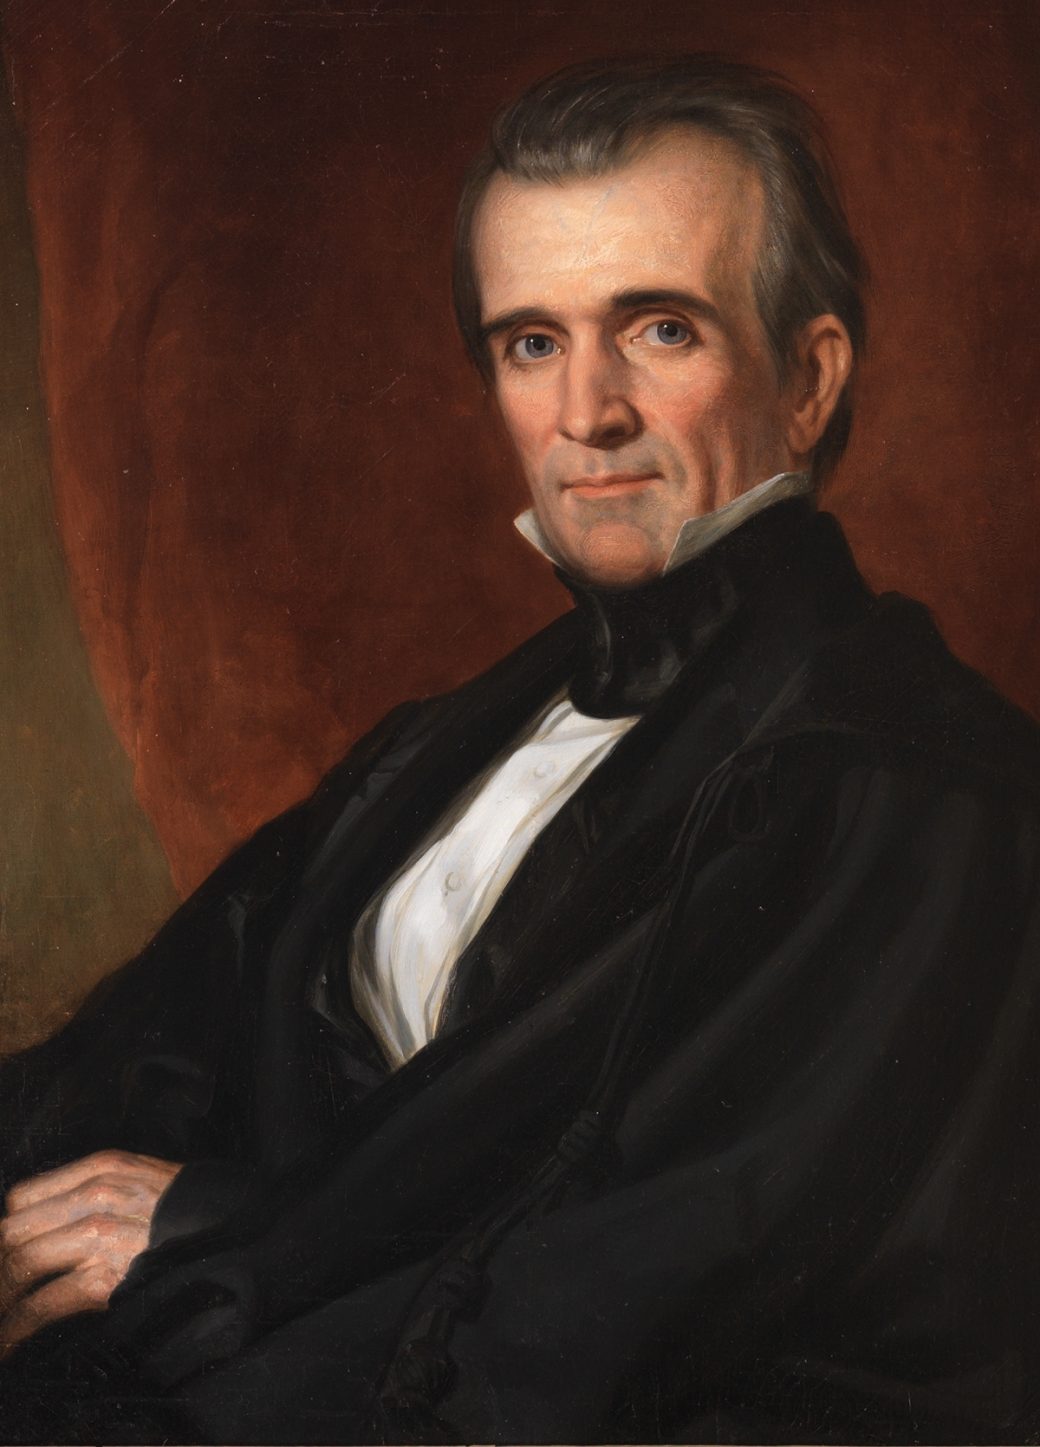 Trump may turn out to be the most consequential one-term President since James K. Polk 175 years ago.